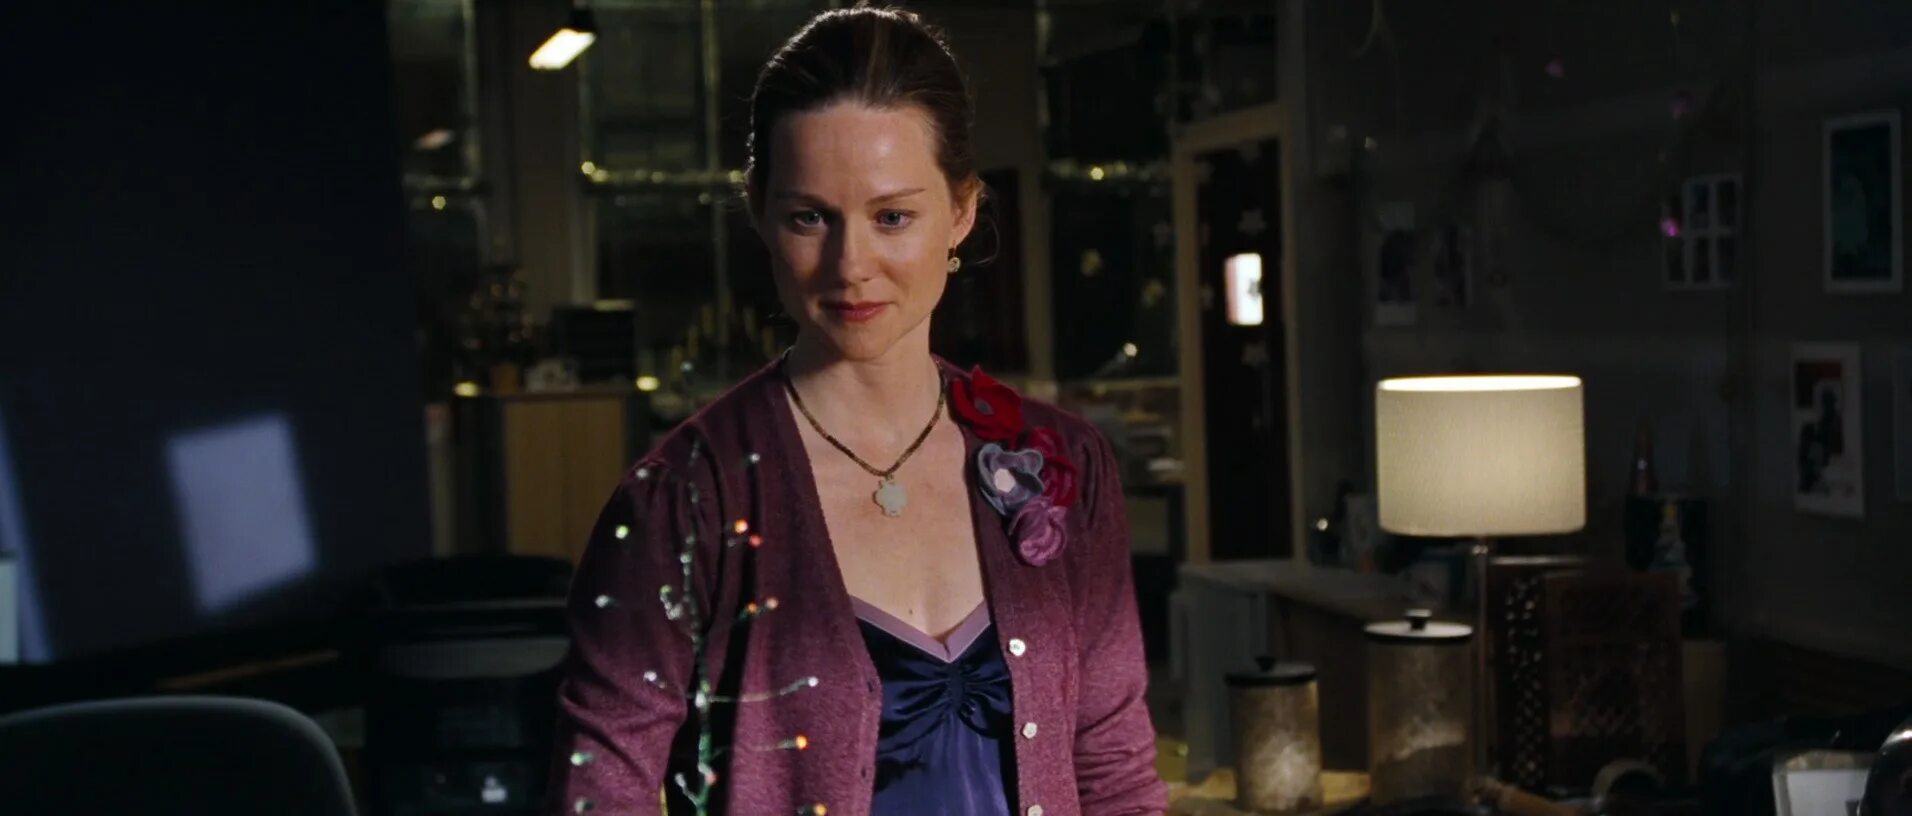 Laura Linney Love 2003. Laura Linney in Love actually 2003. Love lore